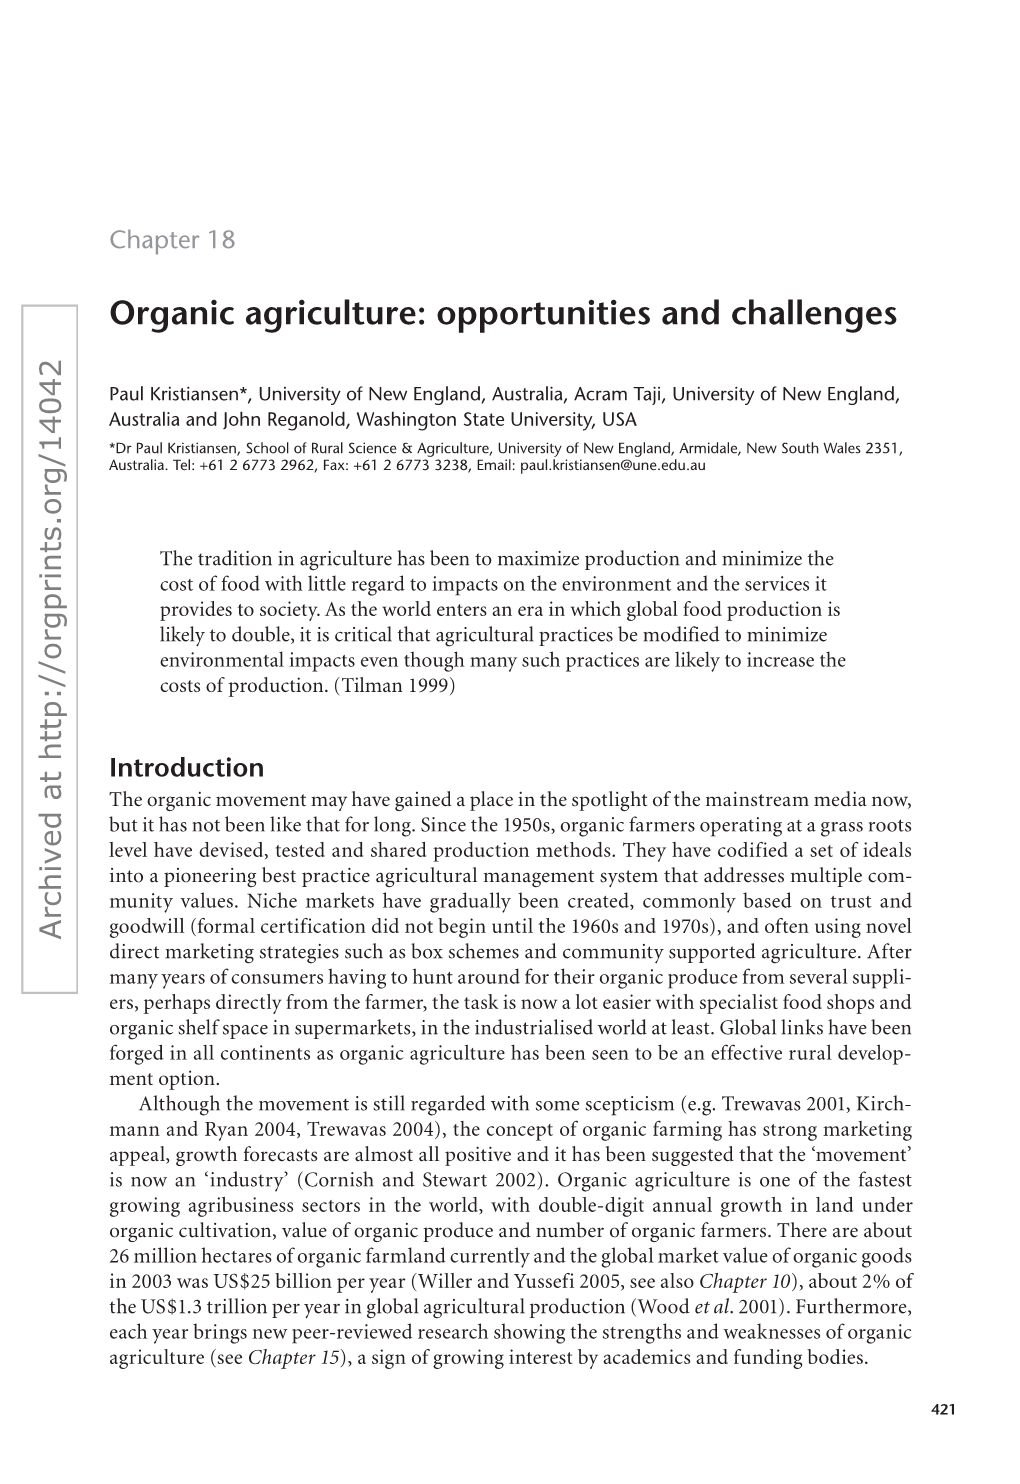 Organic Agriculture: Opportunities and Challenges